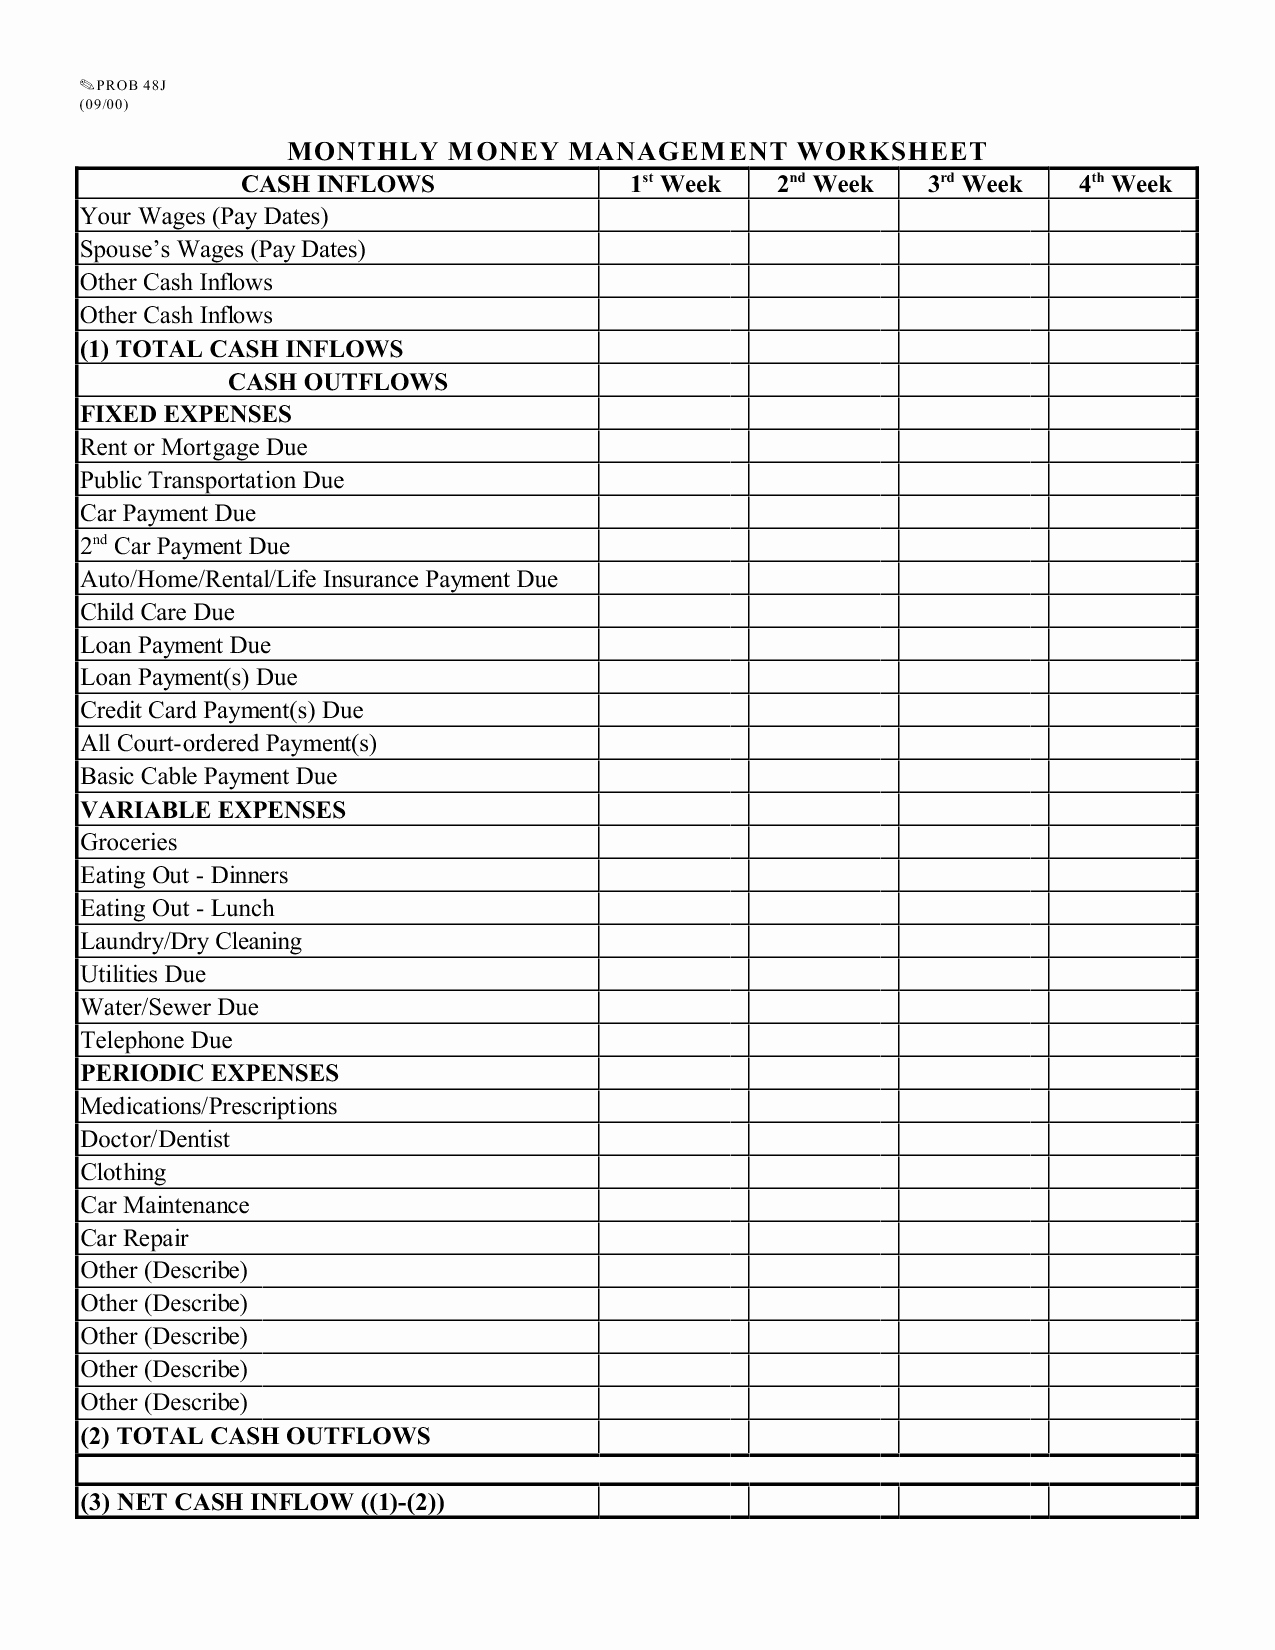 Monthly Income and Expense Worksheet Fresh 16 Best Of Bud Worksheet Monthly Bill Blank